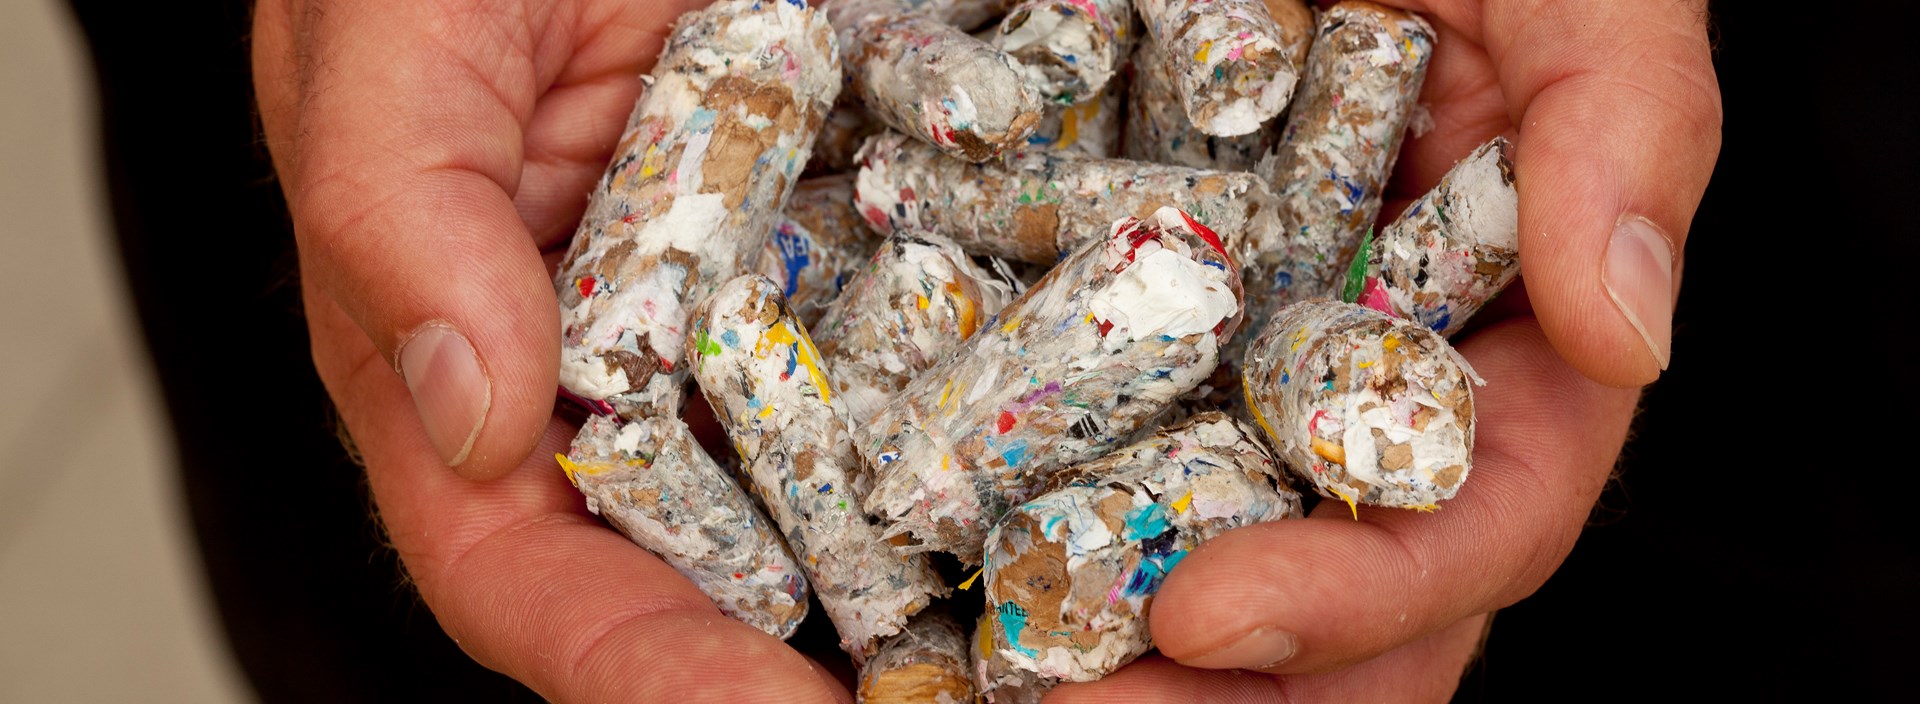 These are fuel pellets produced by Convergen Energy using nonrecyclable material.